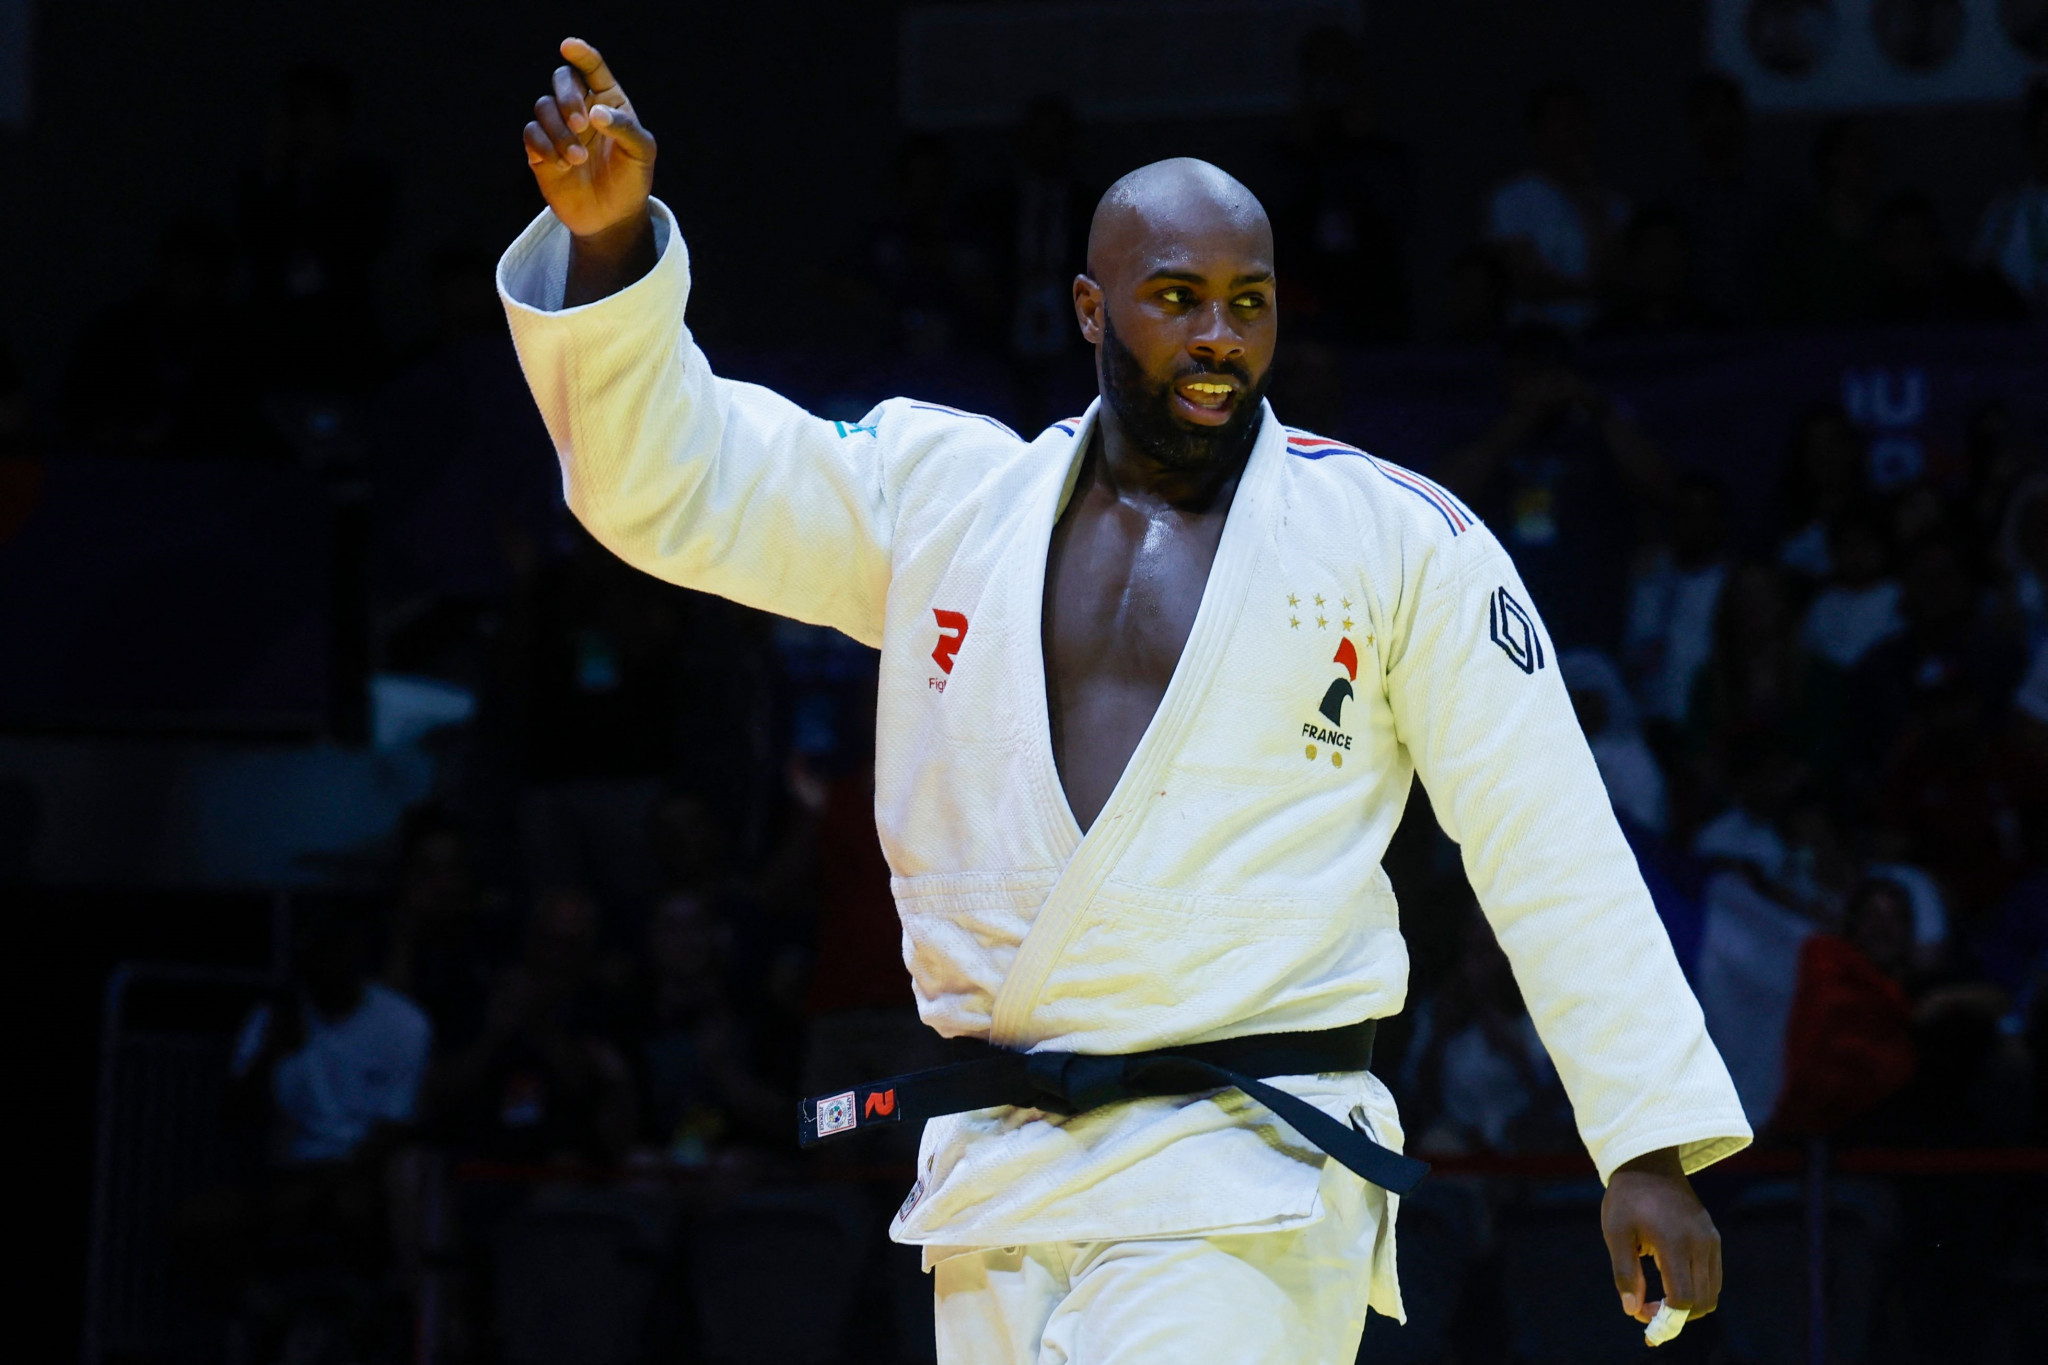 Teddy Riner captured his first world title since 2017 in Doha ©Getty Images